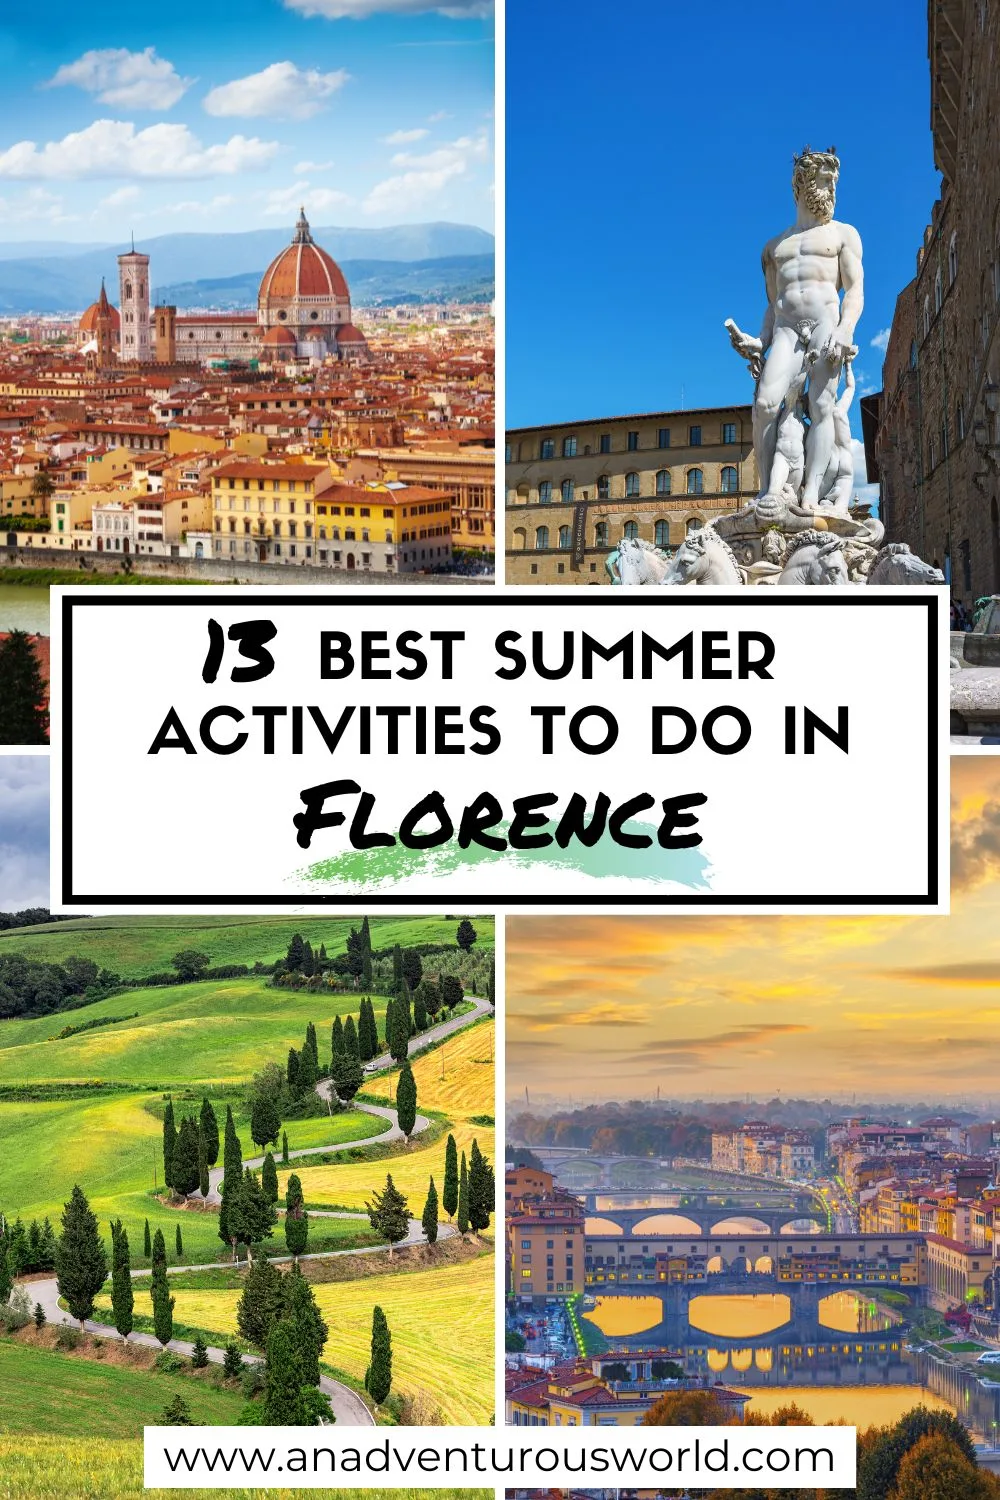 13 BEST Things to do in Florence in Summer